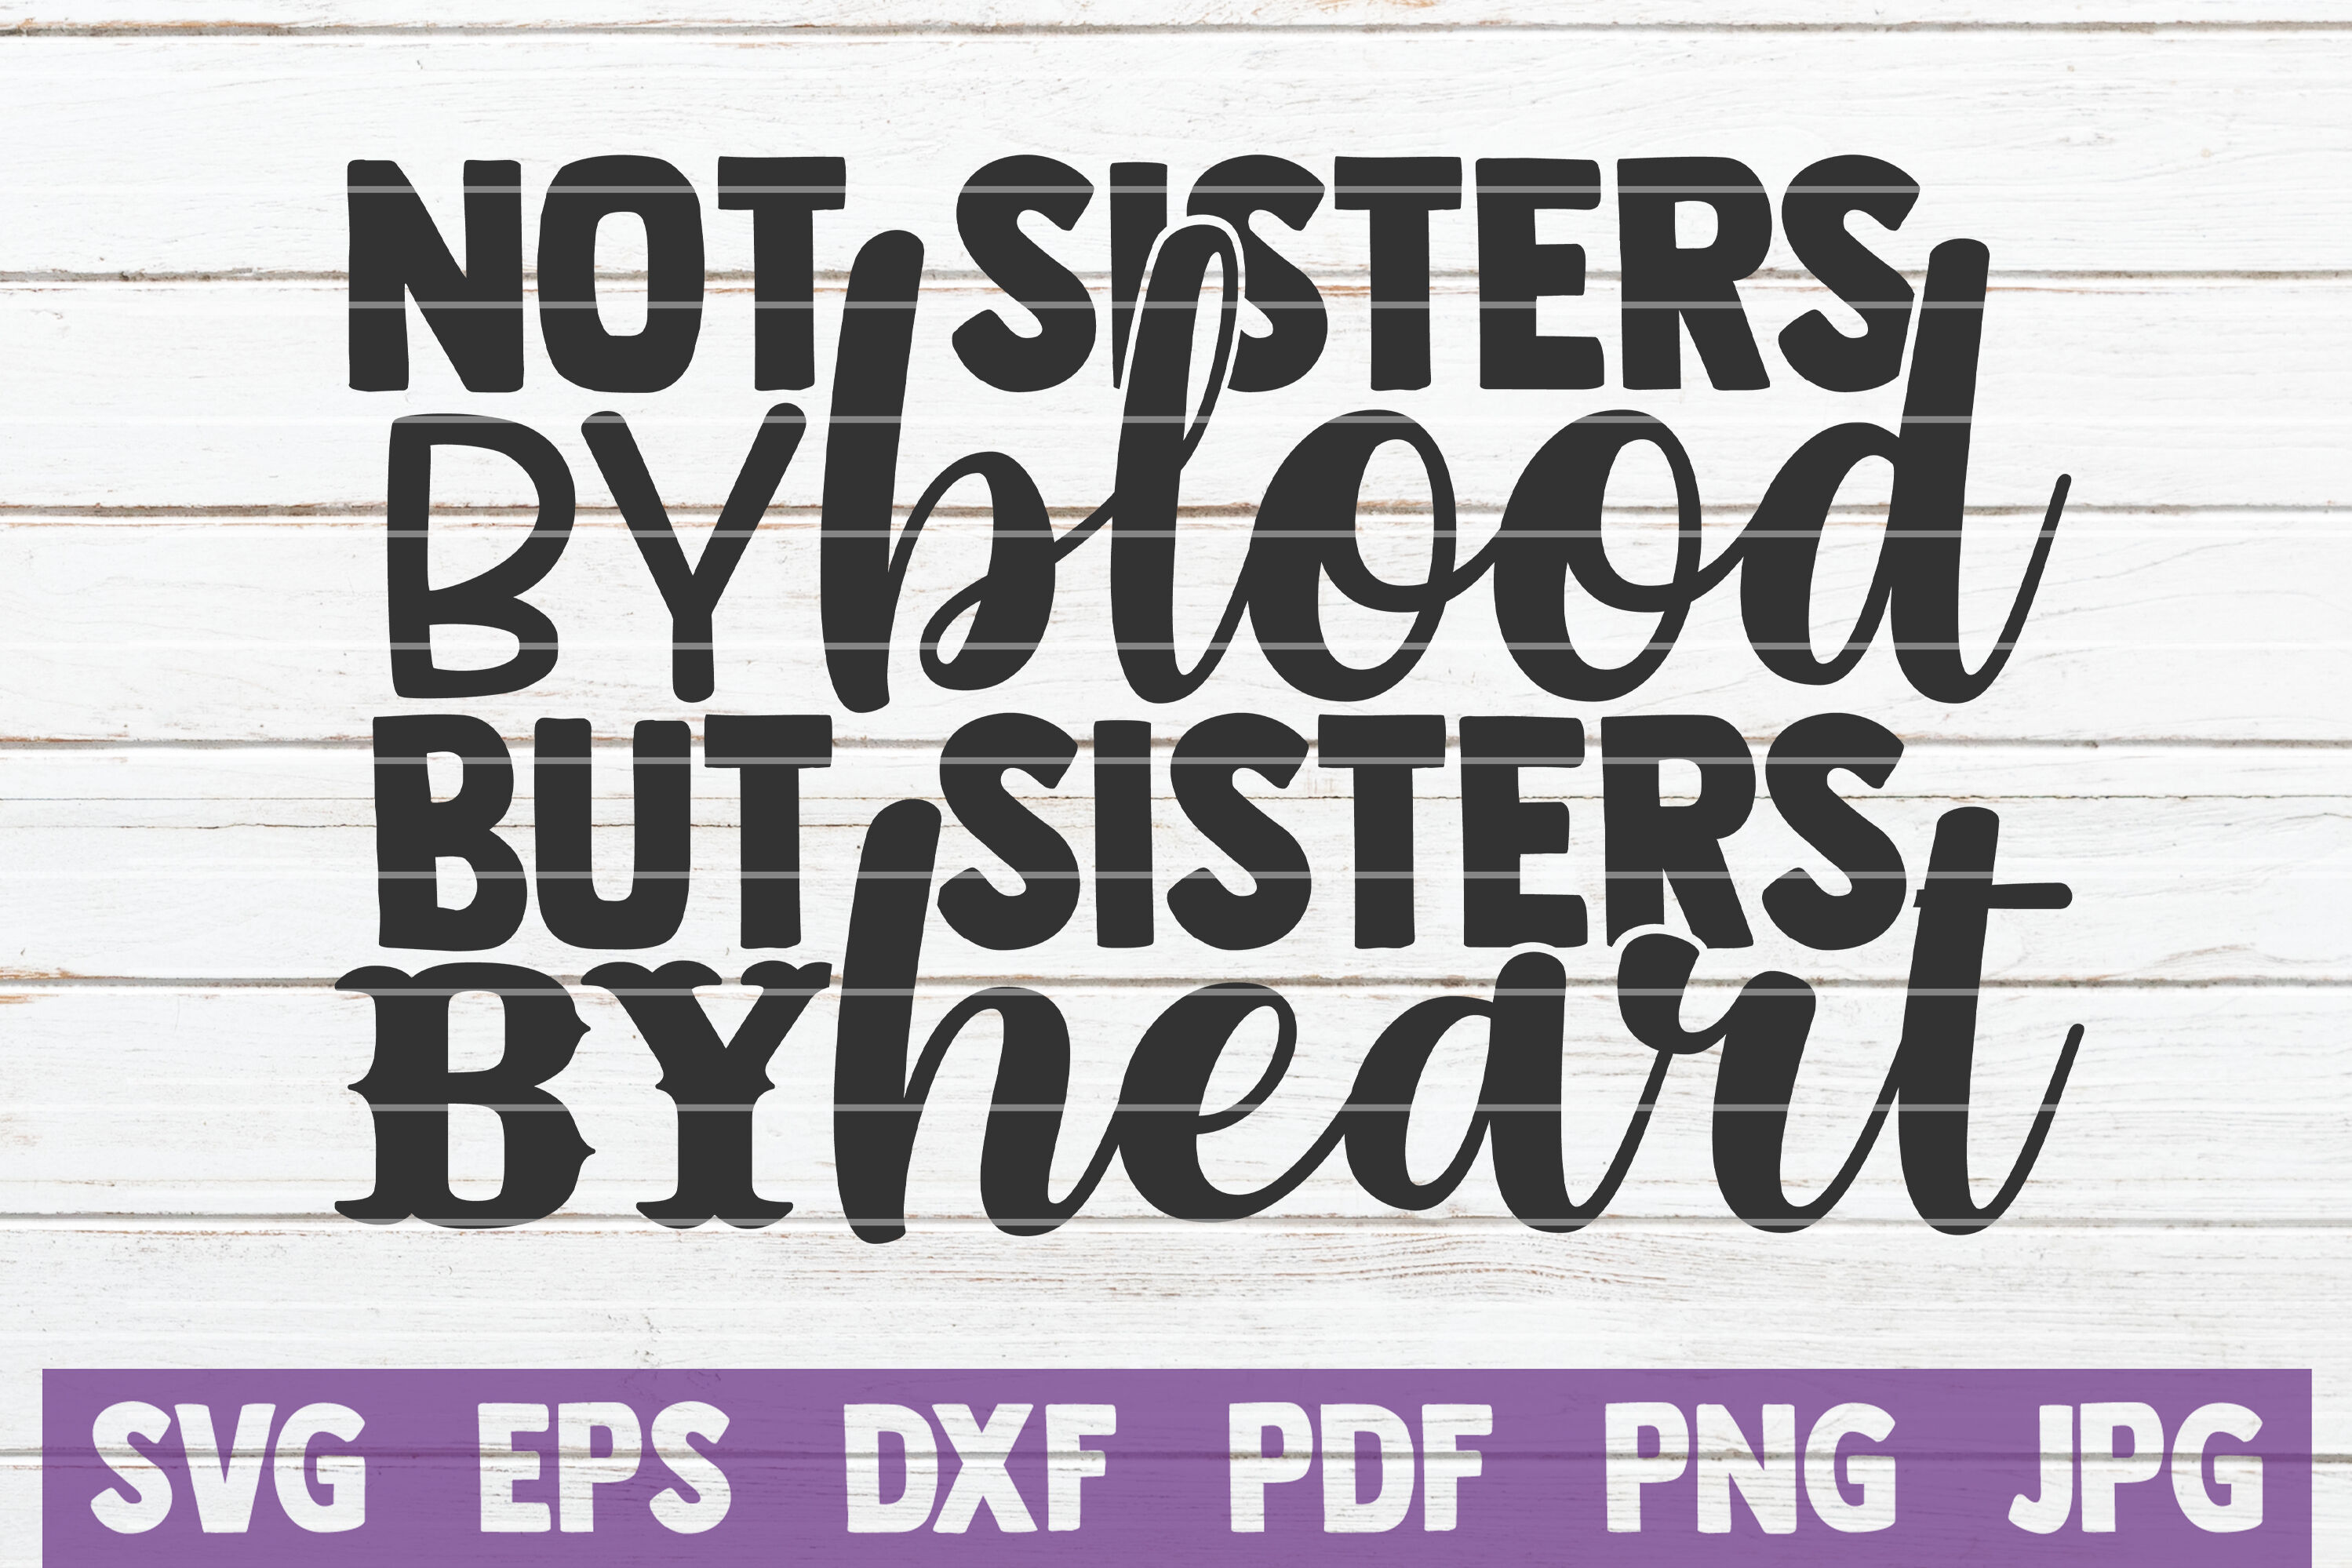 Download Not Sisters By Blood But Sisters By Heart Svg Cut File By Mintymarshmallows Thehungryjpeg Com